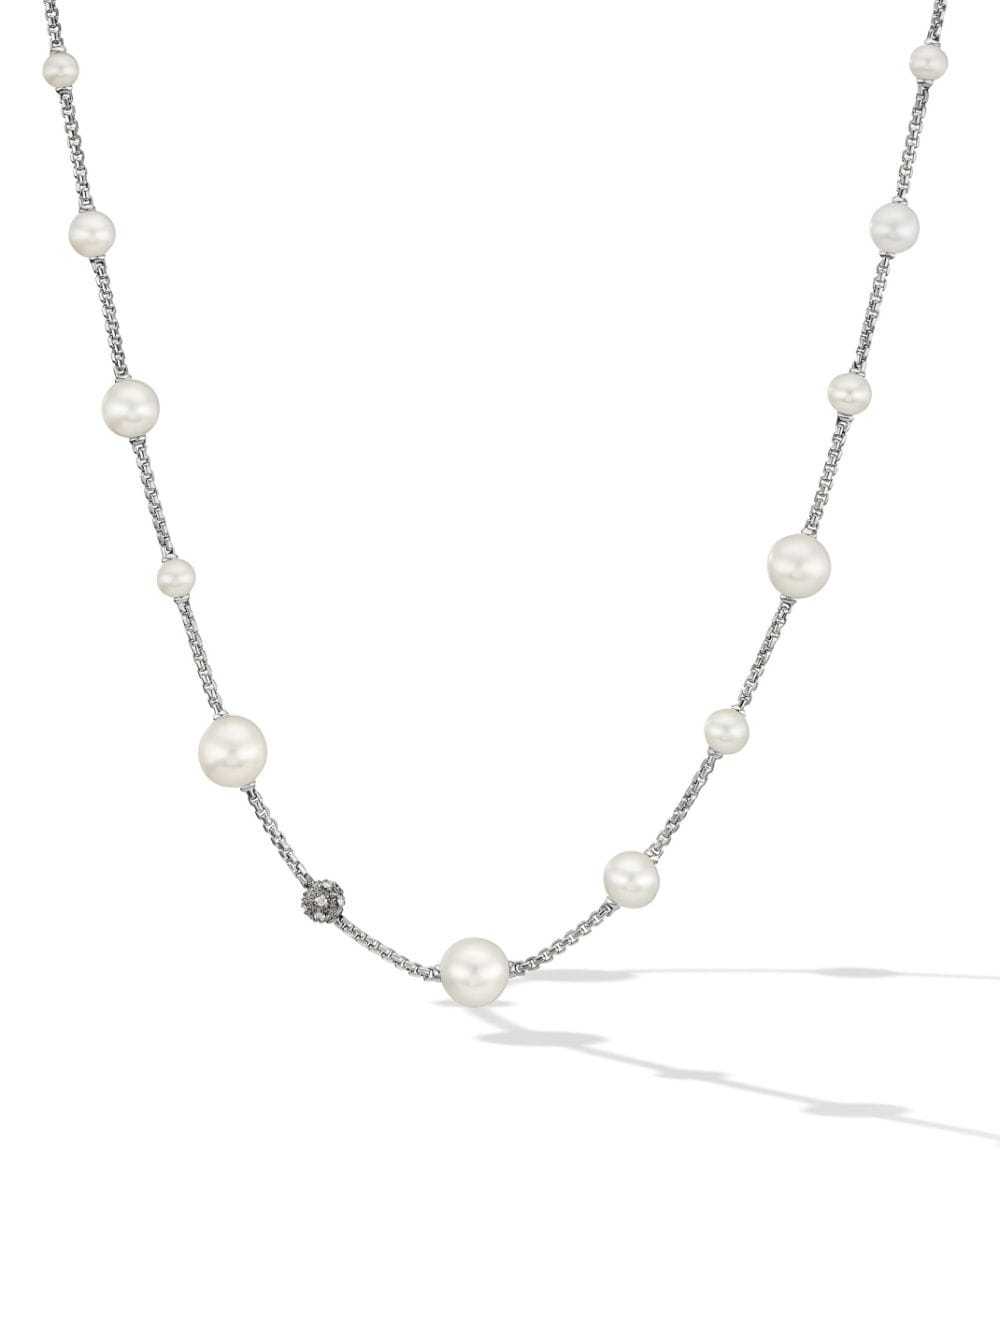 DAVID YURMAN STERLING SILVER STATION PEARL AND DIAMOND NECKLACE